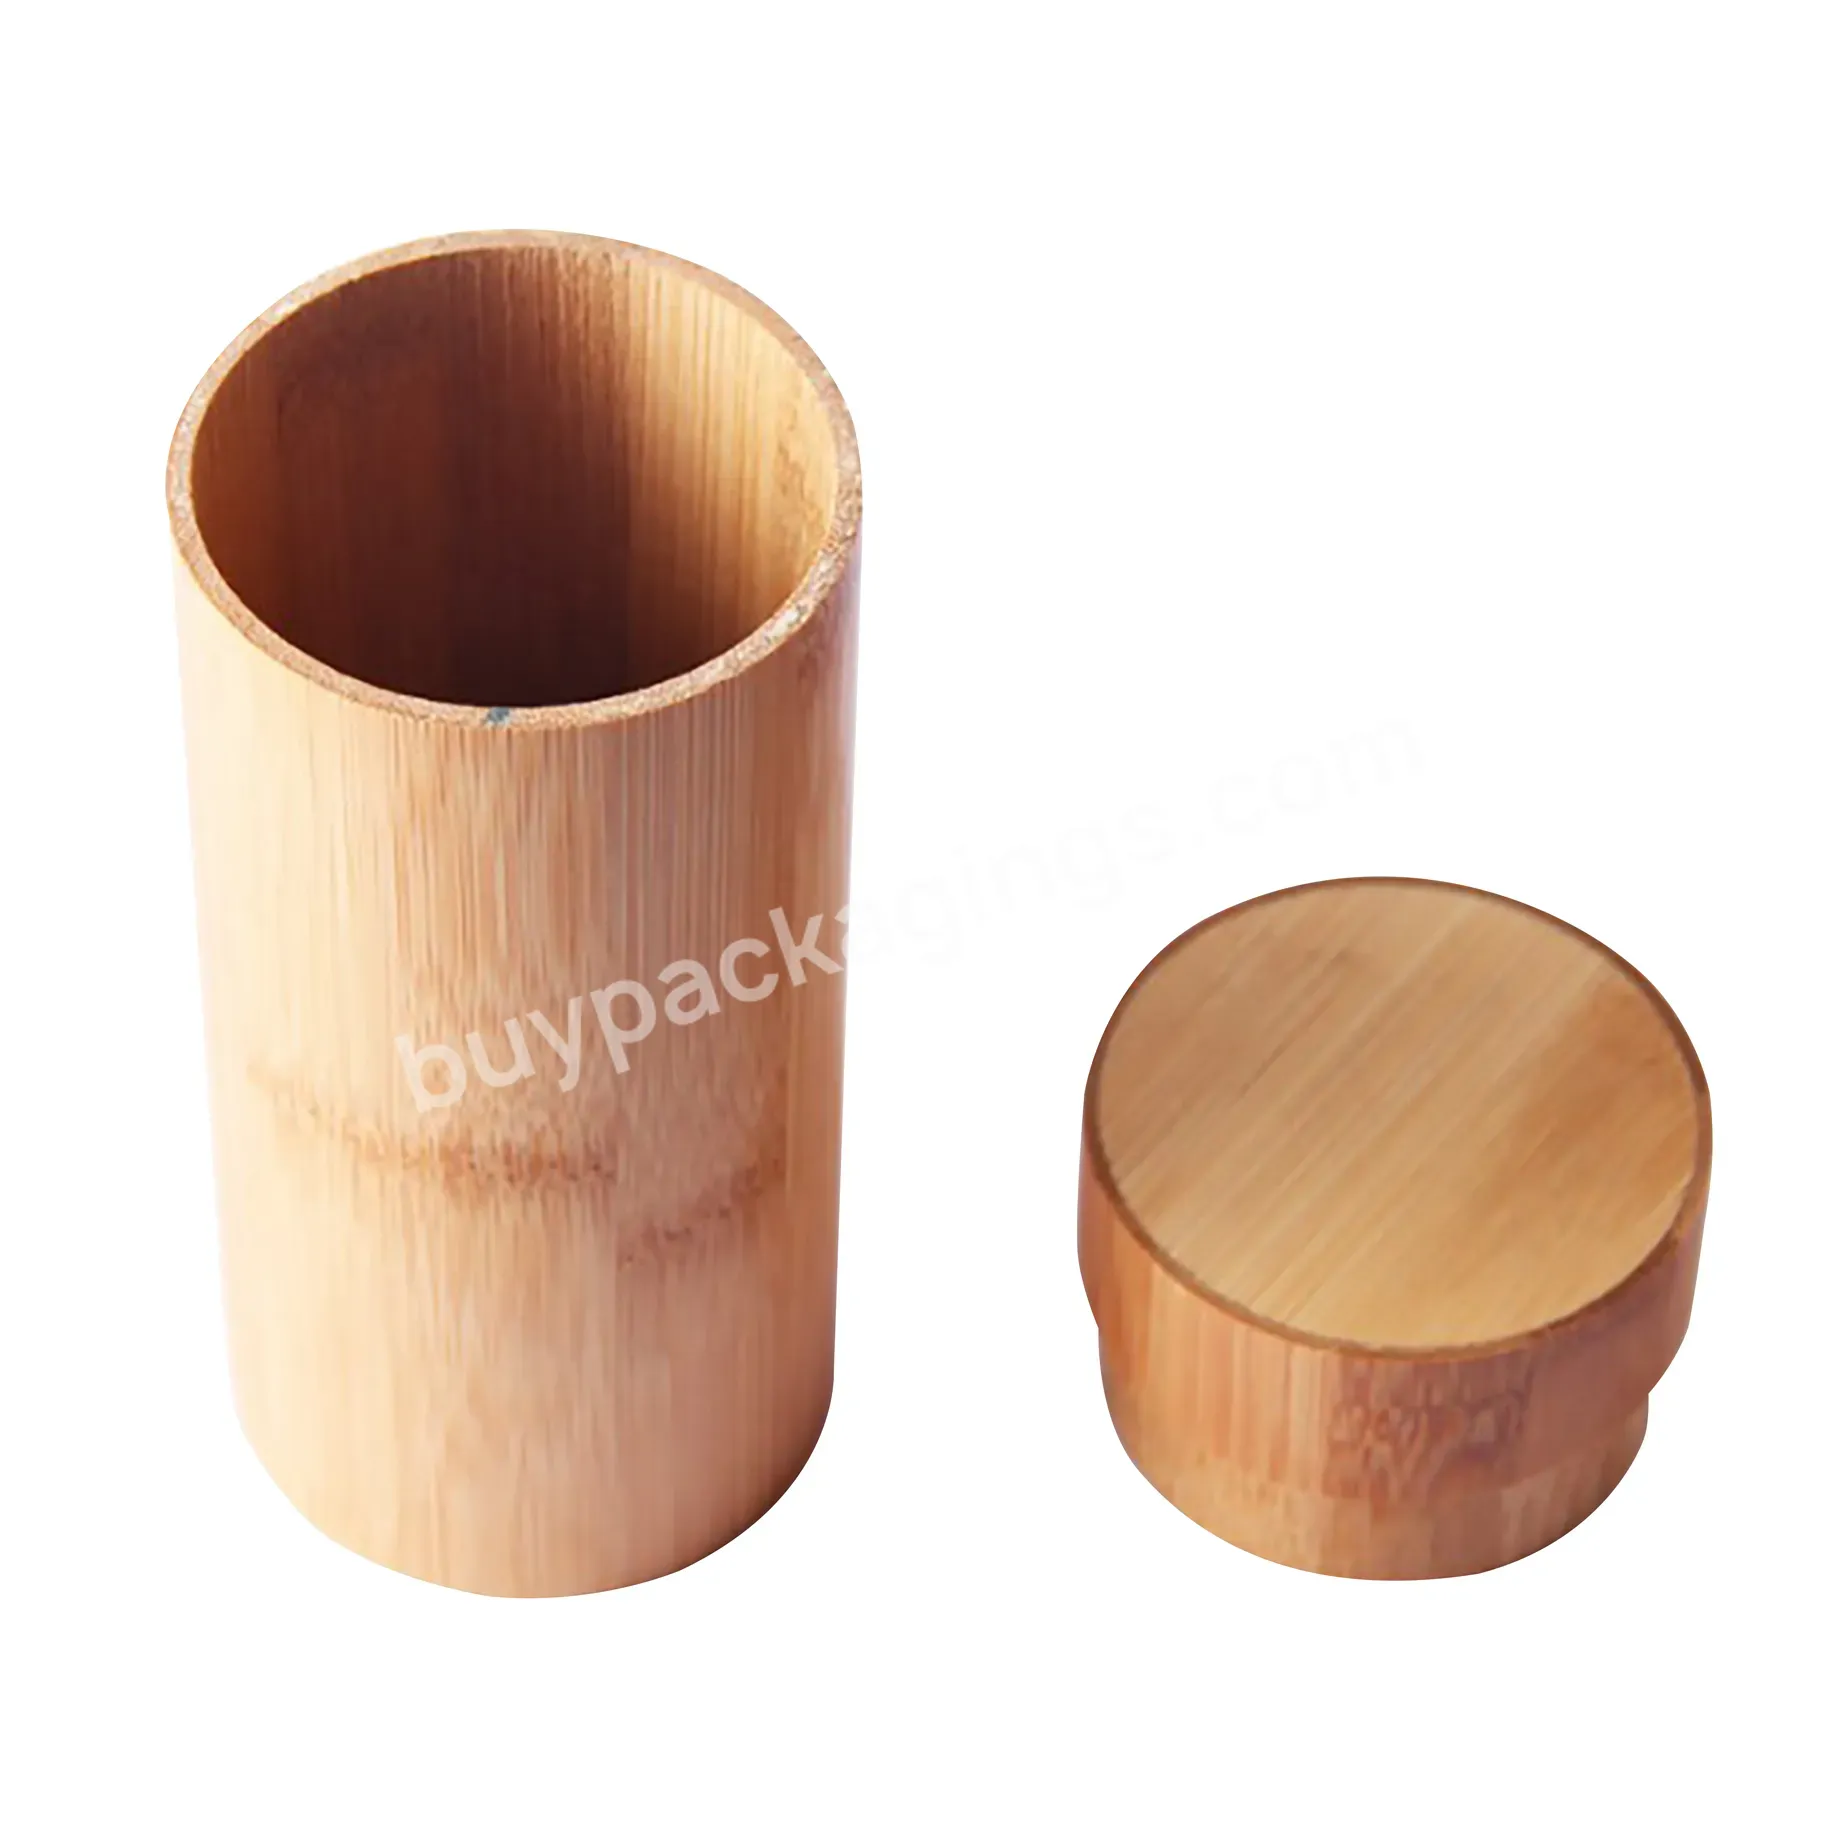 Wholesale Round Bamboo Jar Natural Handmade Bamboo Sunglasses Box Bamboo Container For Kitchen Spice - Buy 1ml 3ml 5ml 10ml Bamboo Wood Rollerball Bottle Essential Oil Bottle,Aroma Essences Roller Perfume Bottle,Bottle With Wood Cap.